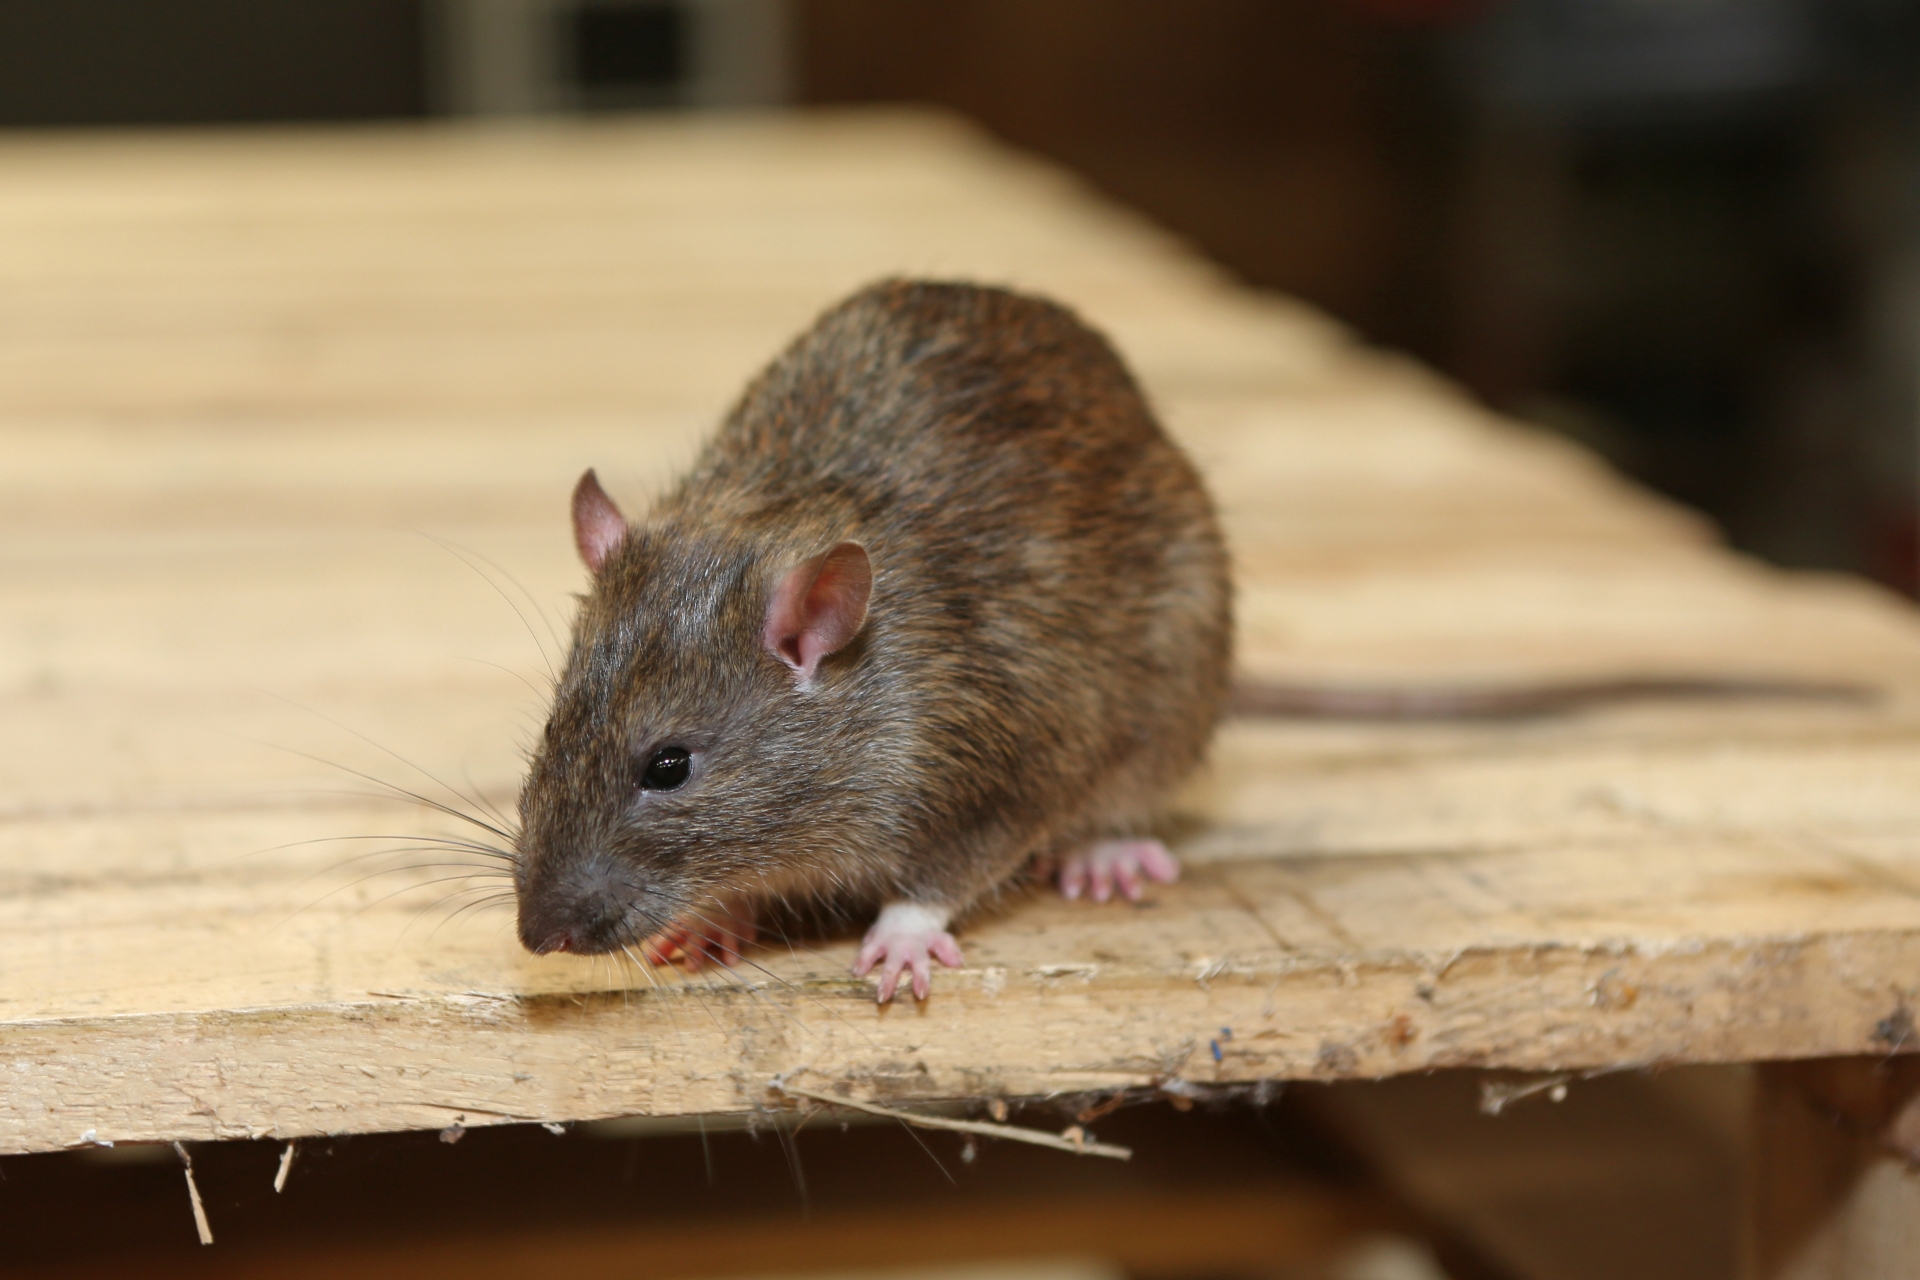 Rat extermination, Pest Control in Seven Sisters, N15. Call Now 020 8166 9746